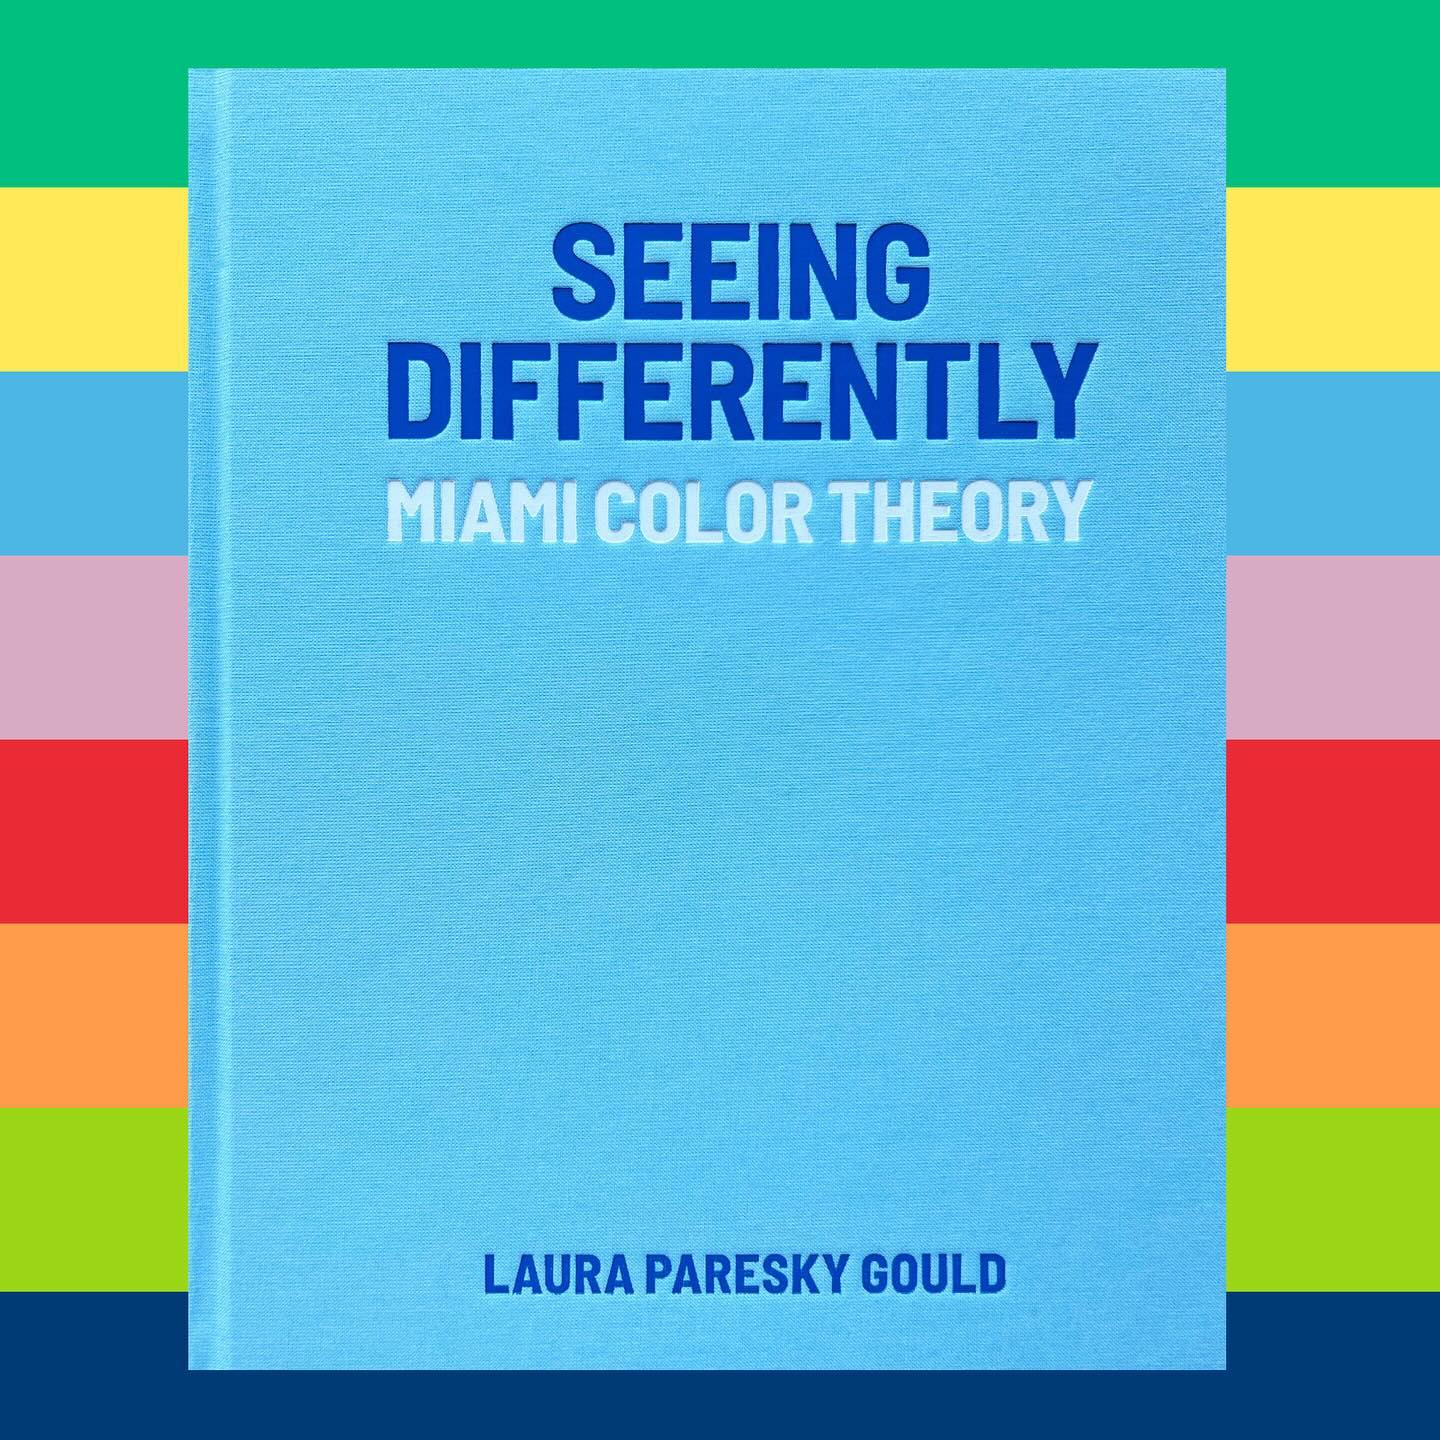 SEEING DIFFERENTLY: Miami Color Theory by Laura Paresky Gould